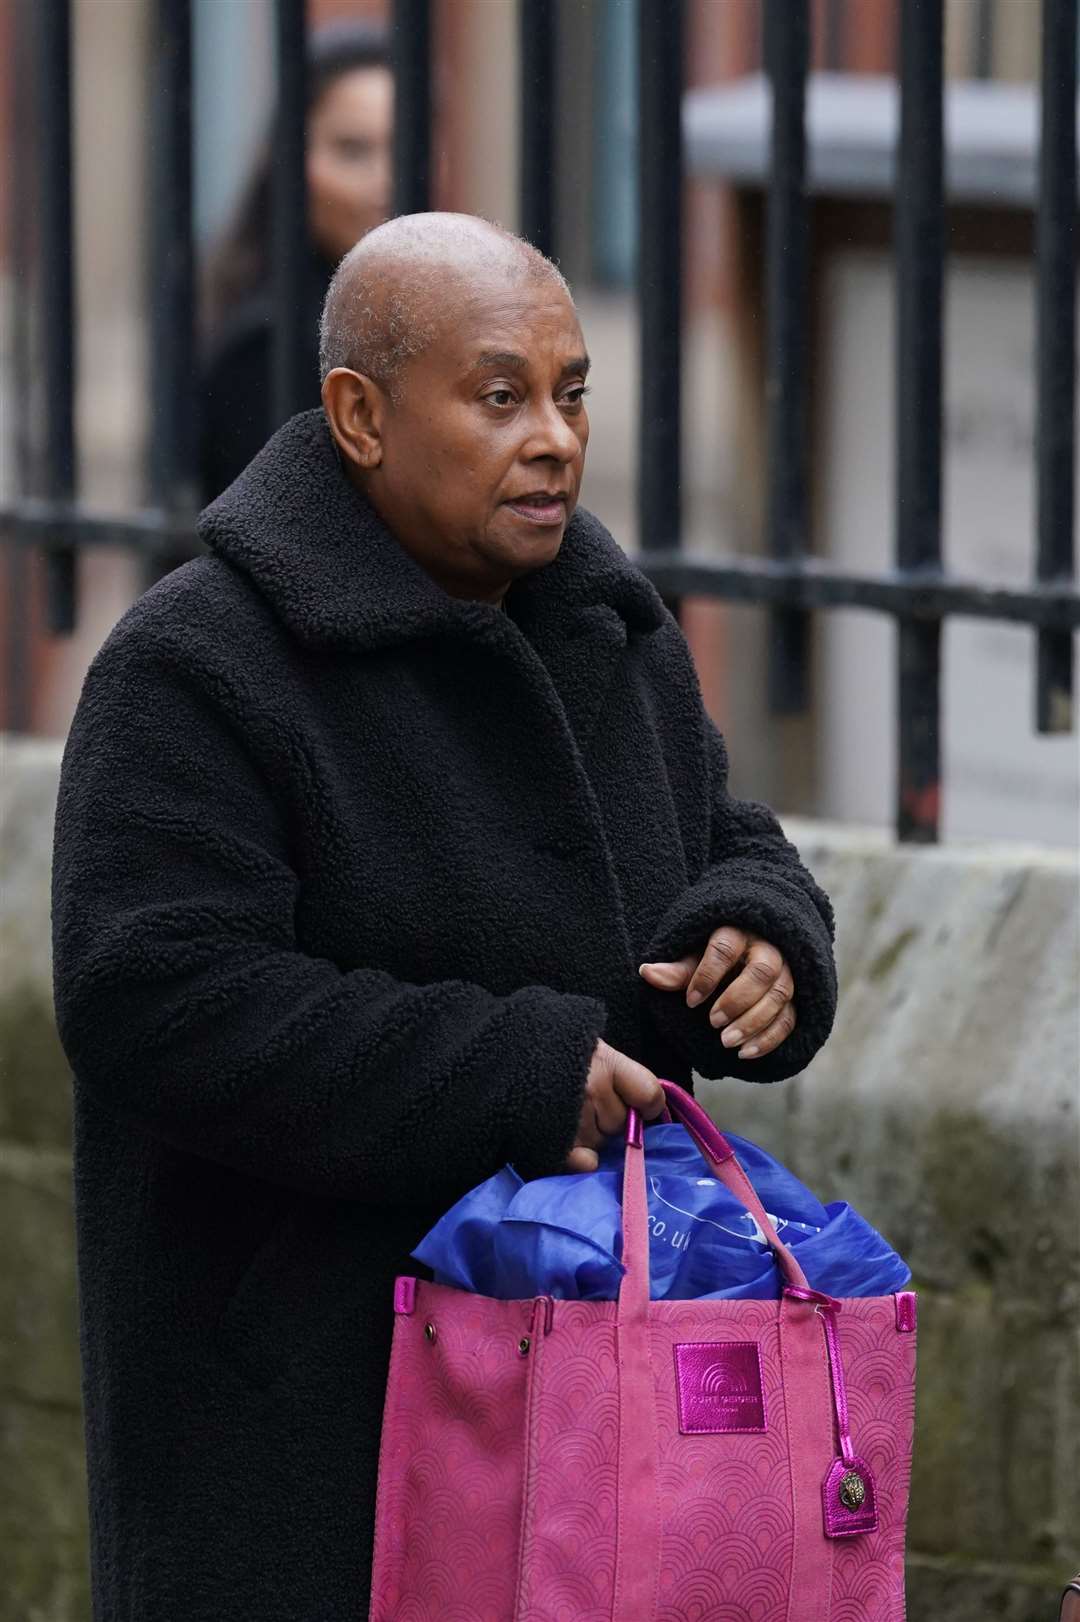 Baroness Doreen Lawrence, who is also suing the publisher of the Daily Mail, attended a hearing at the Royal Courts of Justice on Tuesday (Gareth Fuller/PA)